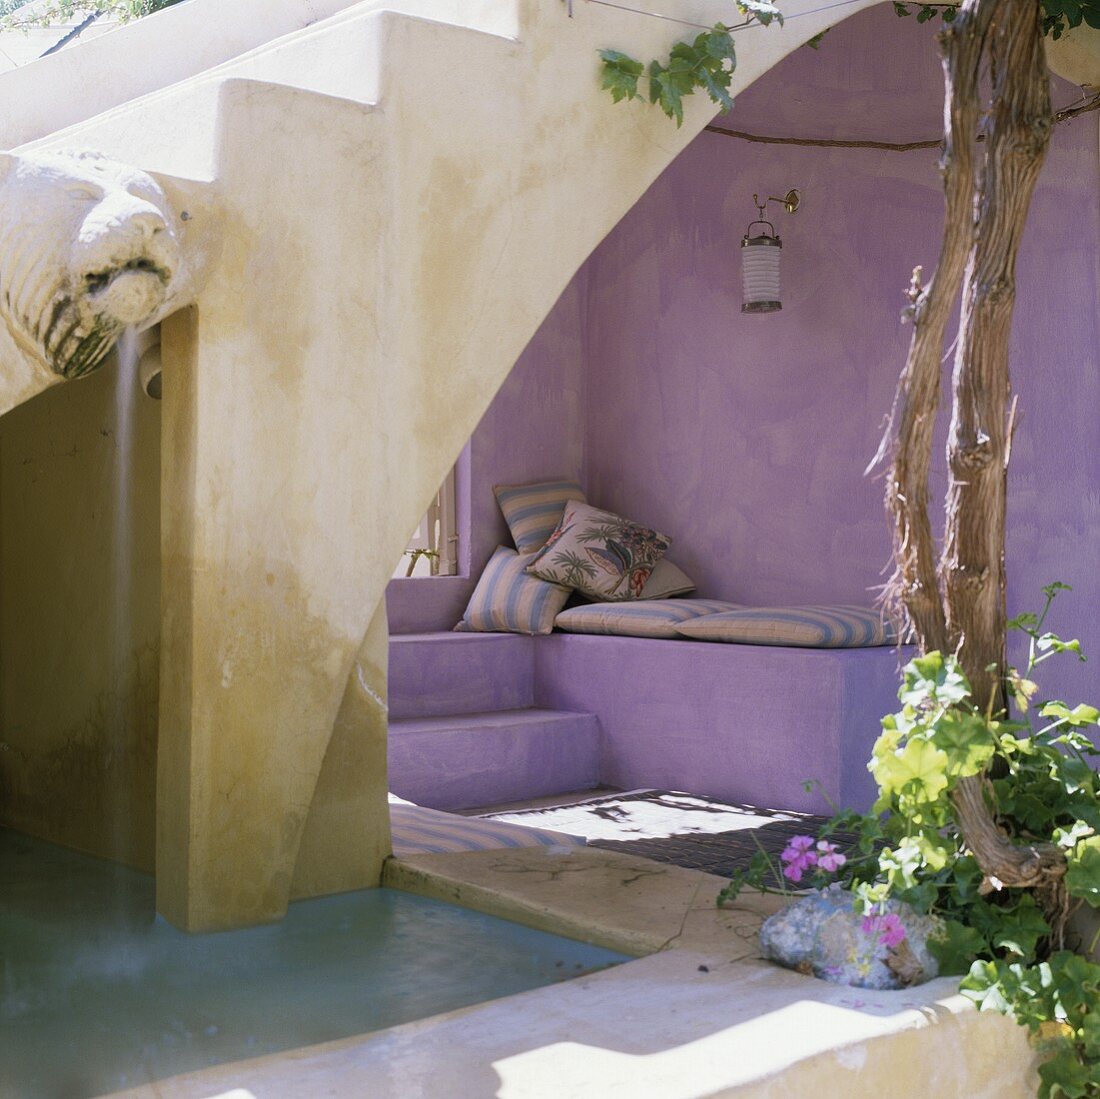 Mediterranean courtyard with a stone flight of steps and a lilac painted, upholstered niche